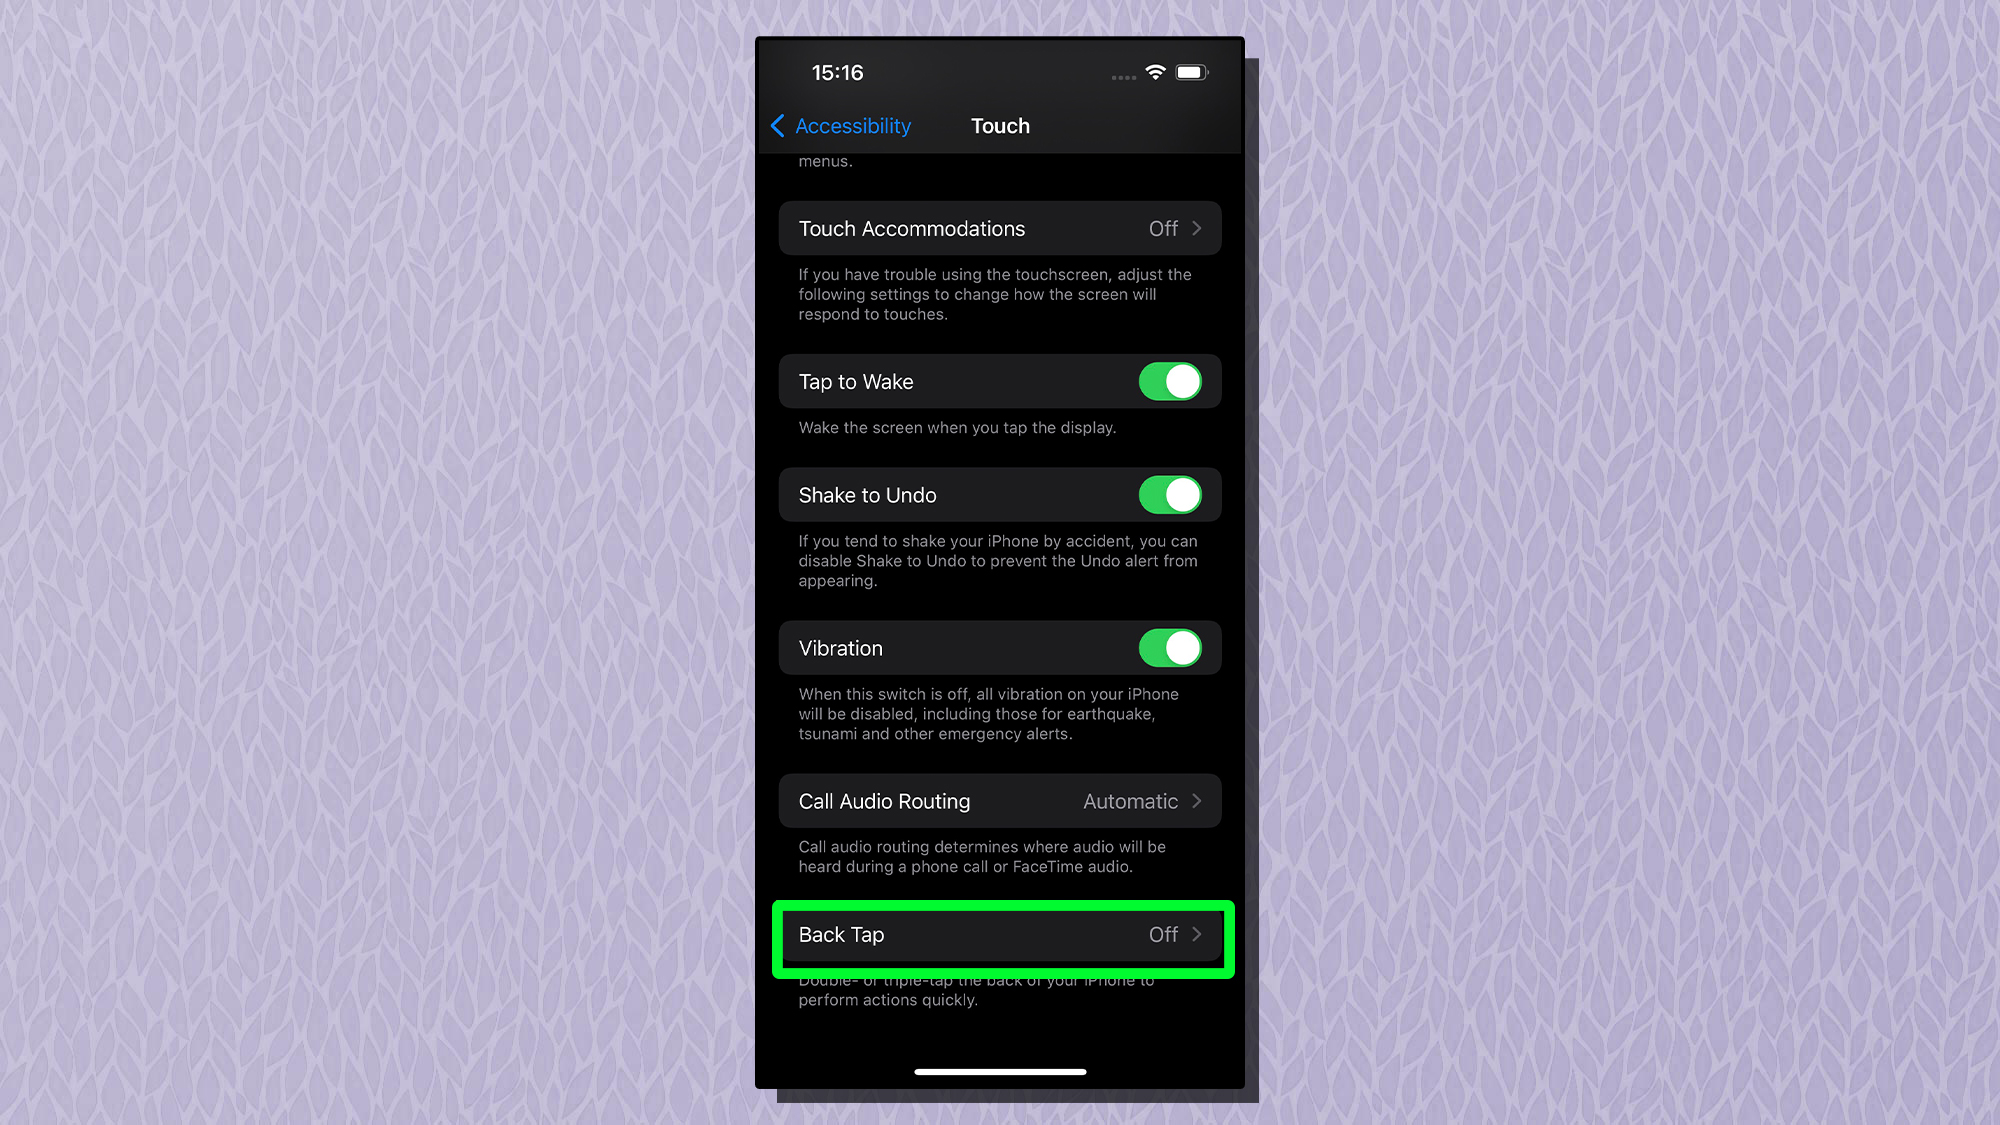 A screenshot showing the Back Tap option highlighted within the Touch menu on an iPhone